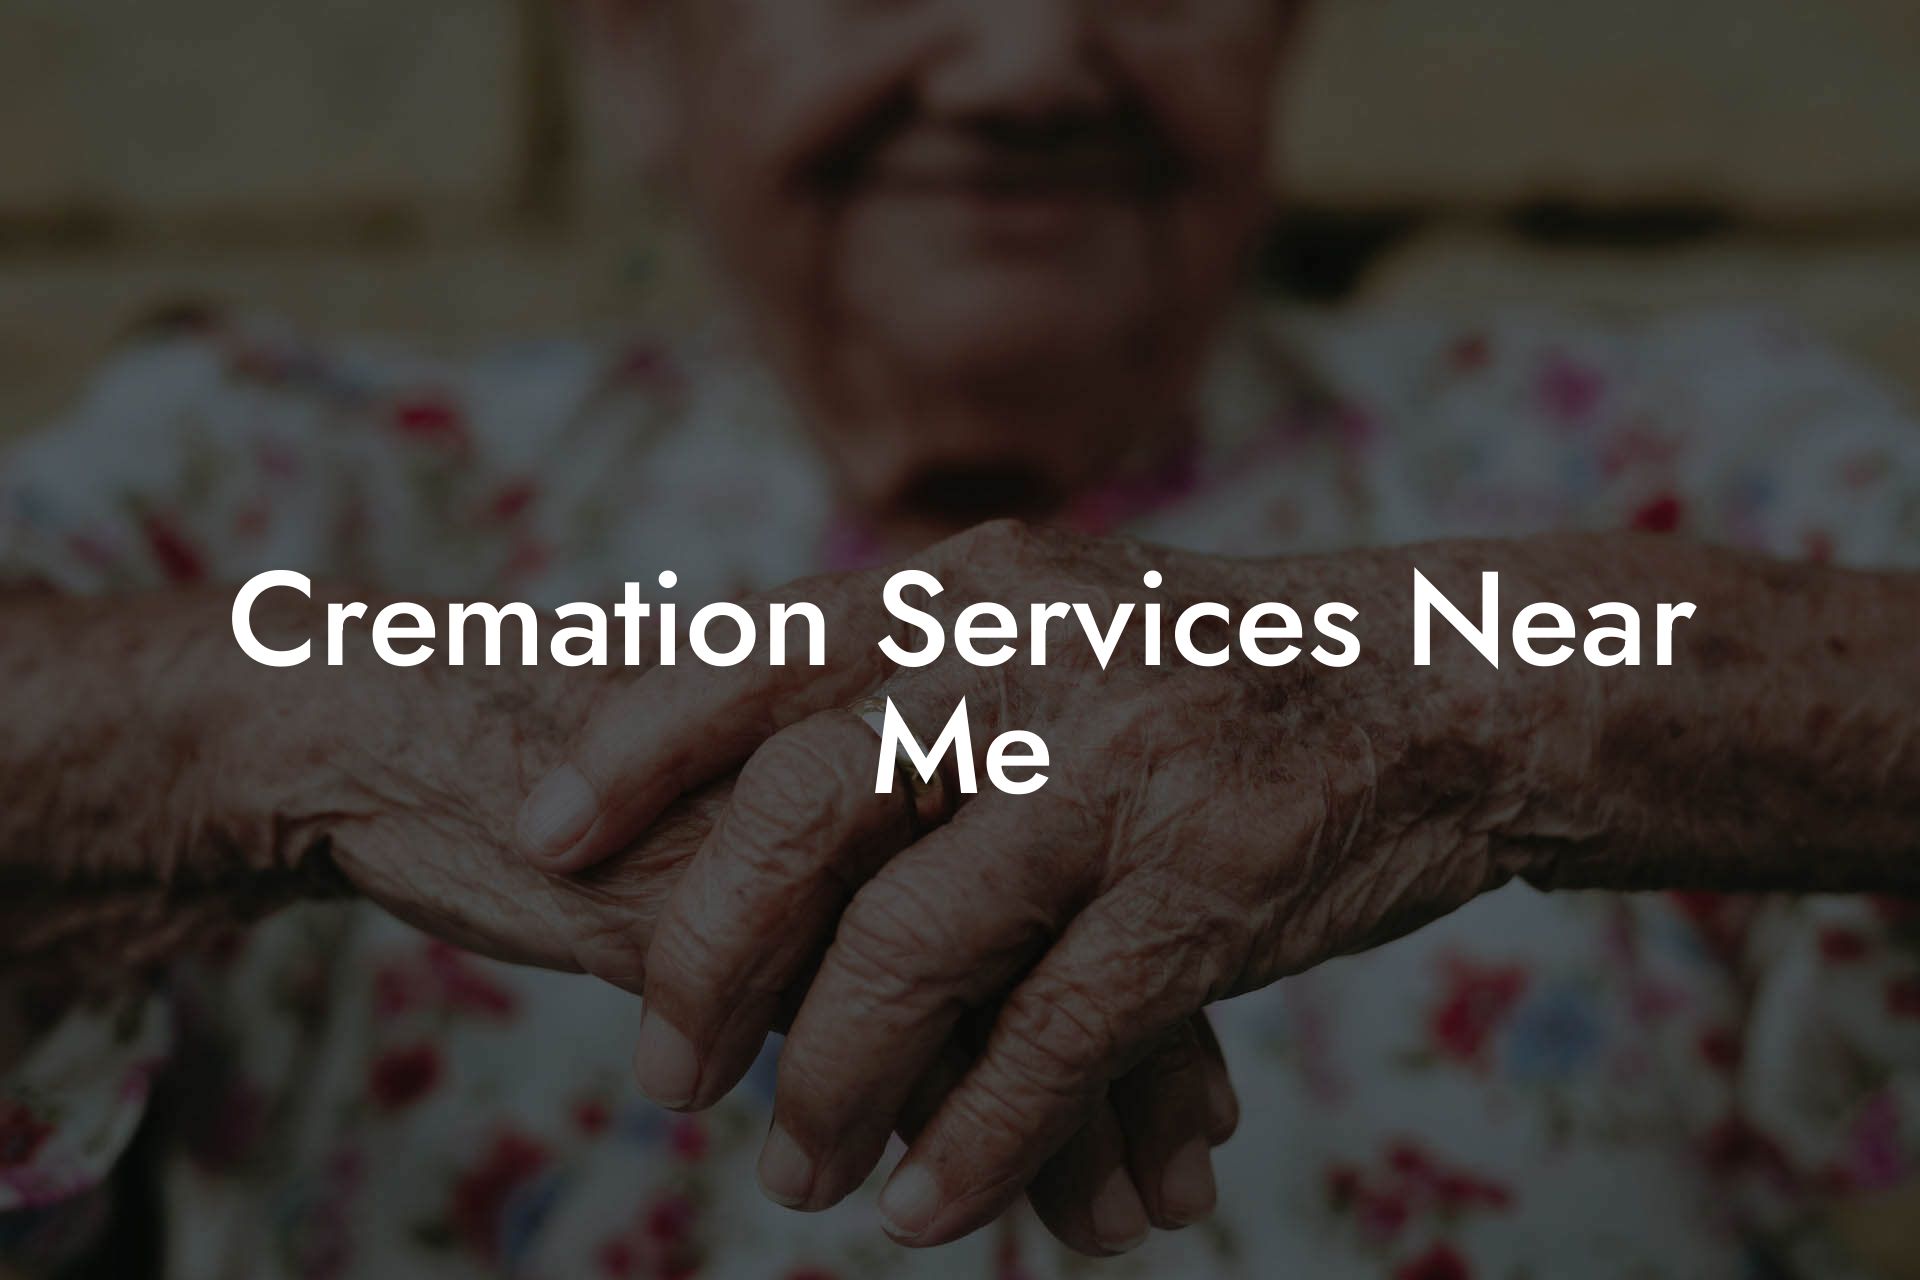 Cremation Services Near Me